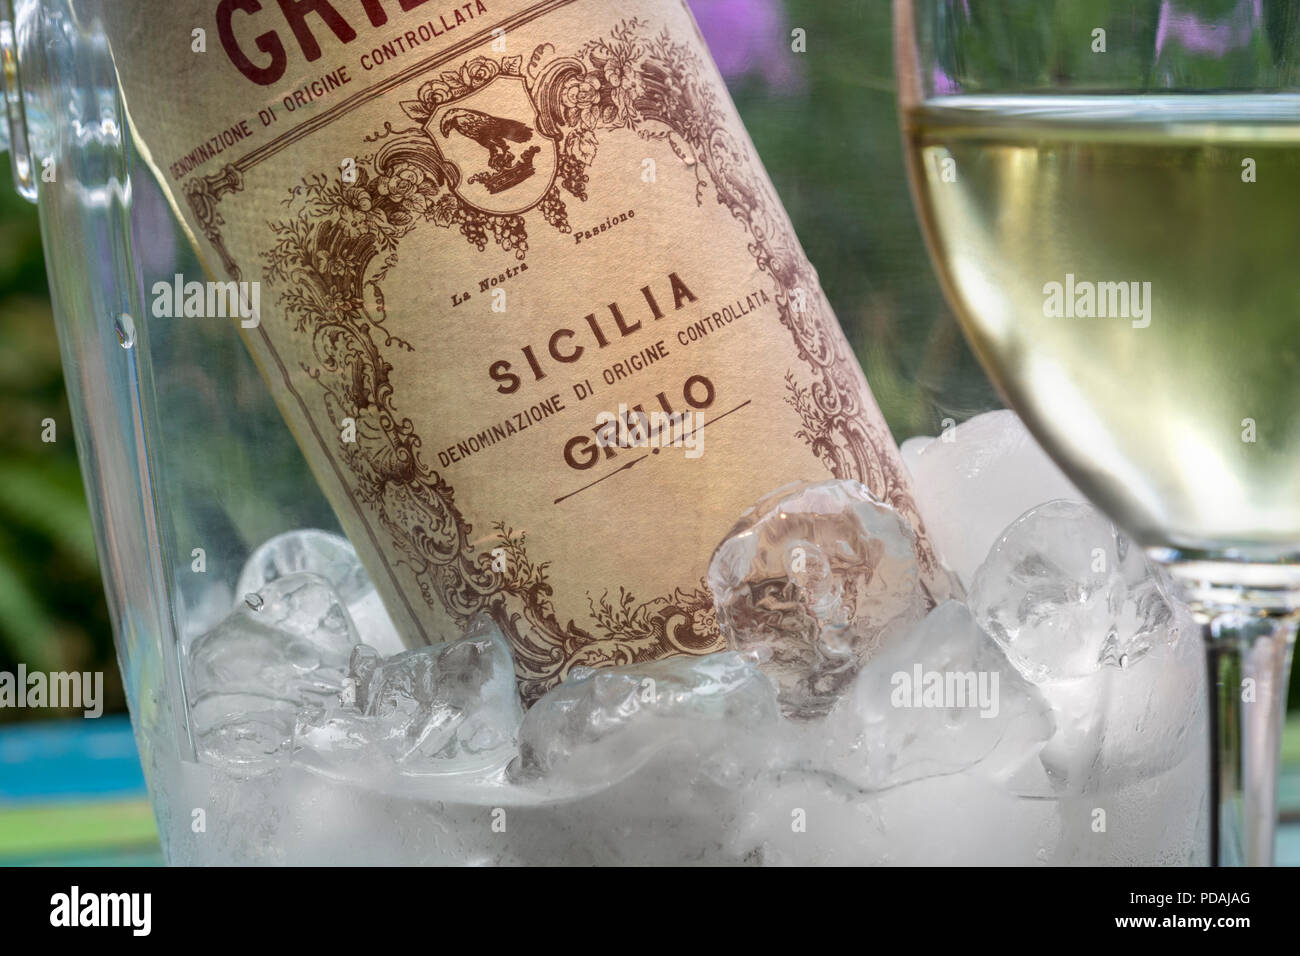 GRILLO SICILY WINE Bottle of Sicilian DOC Grillo white wine in wine cooler & poured glass in foreground alfresco floral garden terrace situation Italy Stock Photo